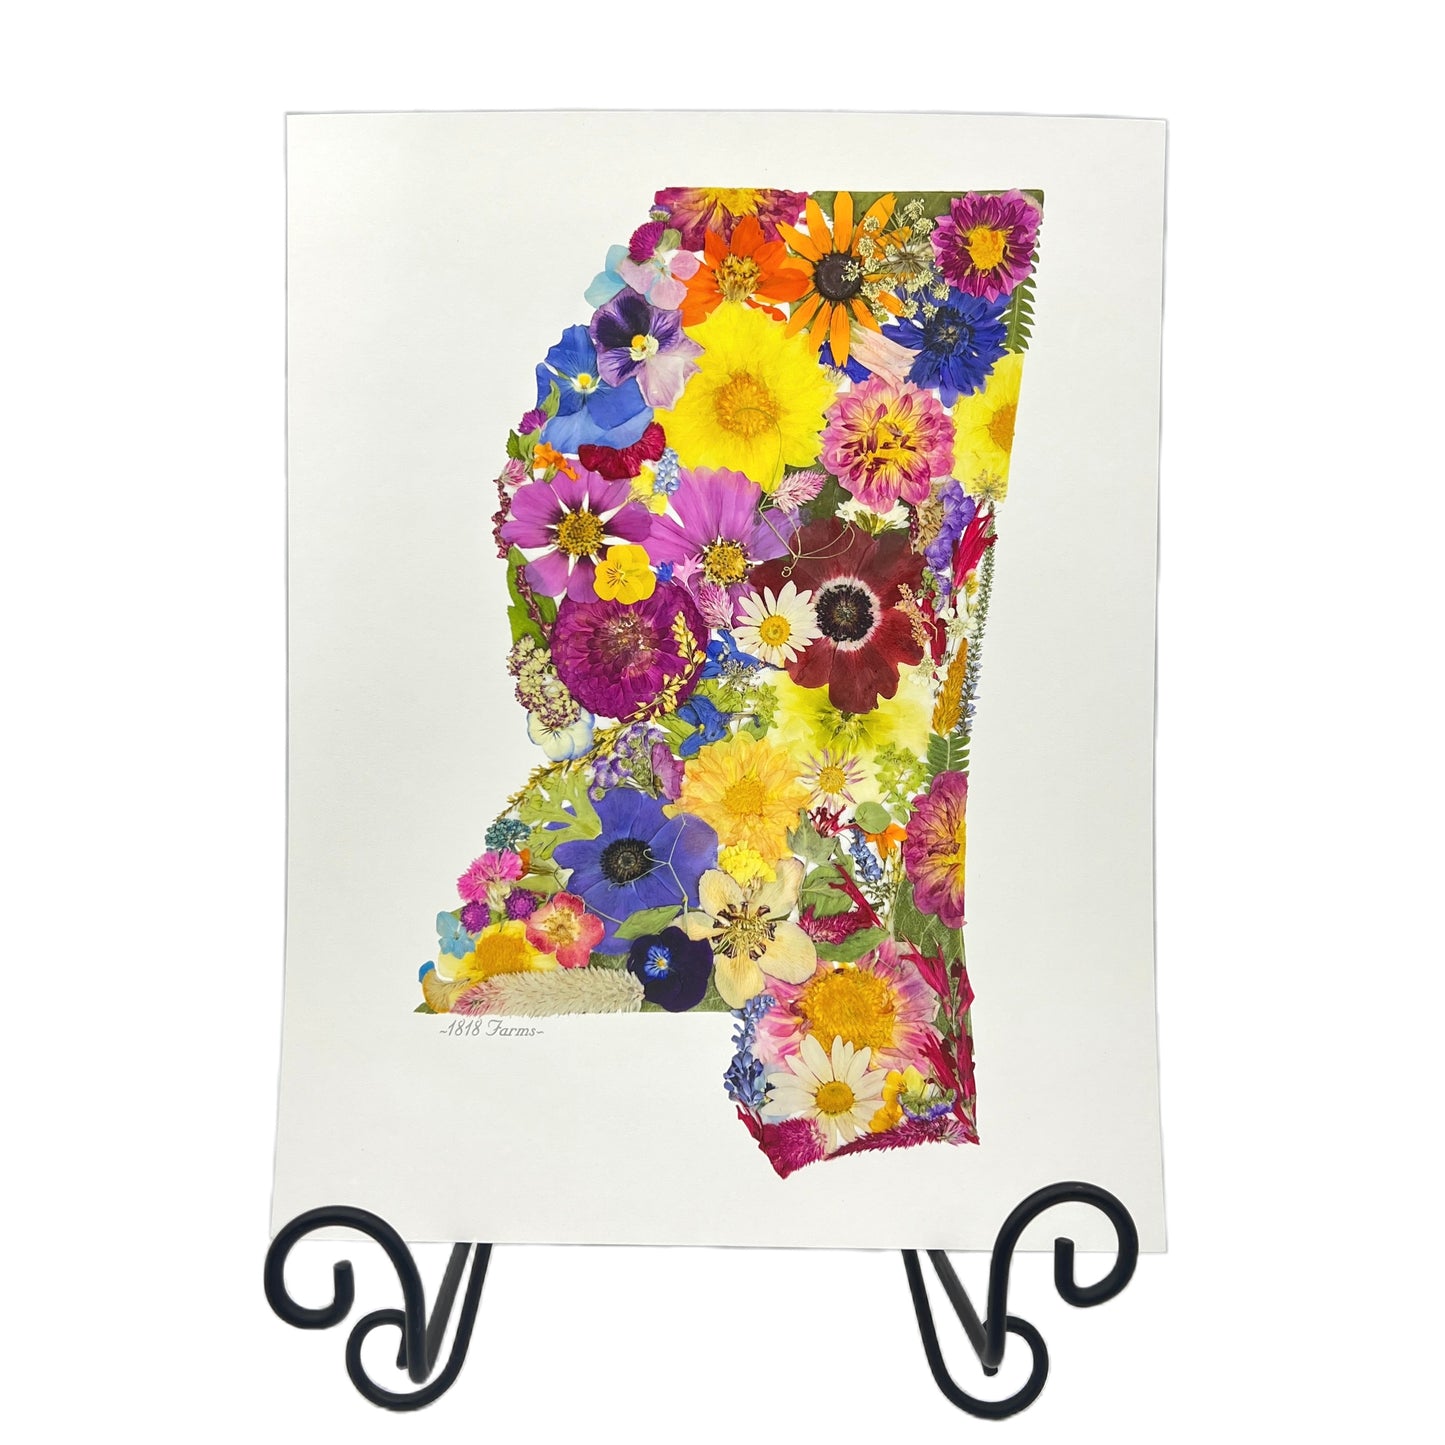 Mississippi Themed Giclée Print  - "Where I Bloom" Collection Giclee Art Print 1818 Farms   